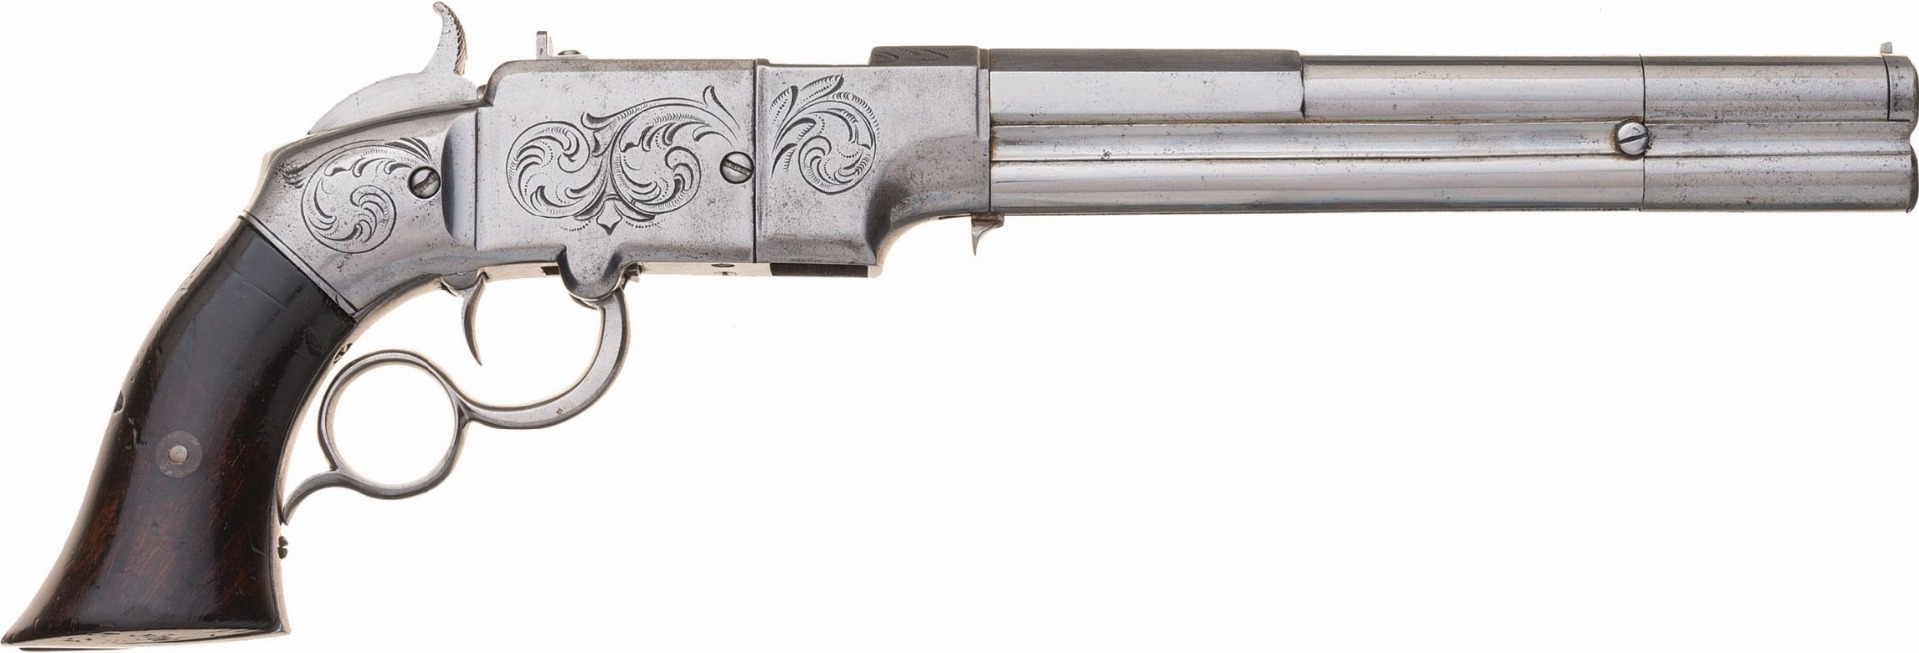 Smith and Wesson Volcanic lever action pistol handgun